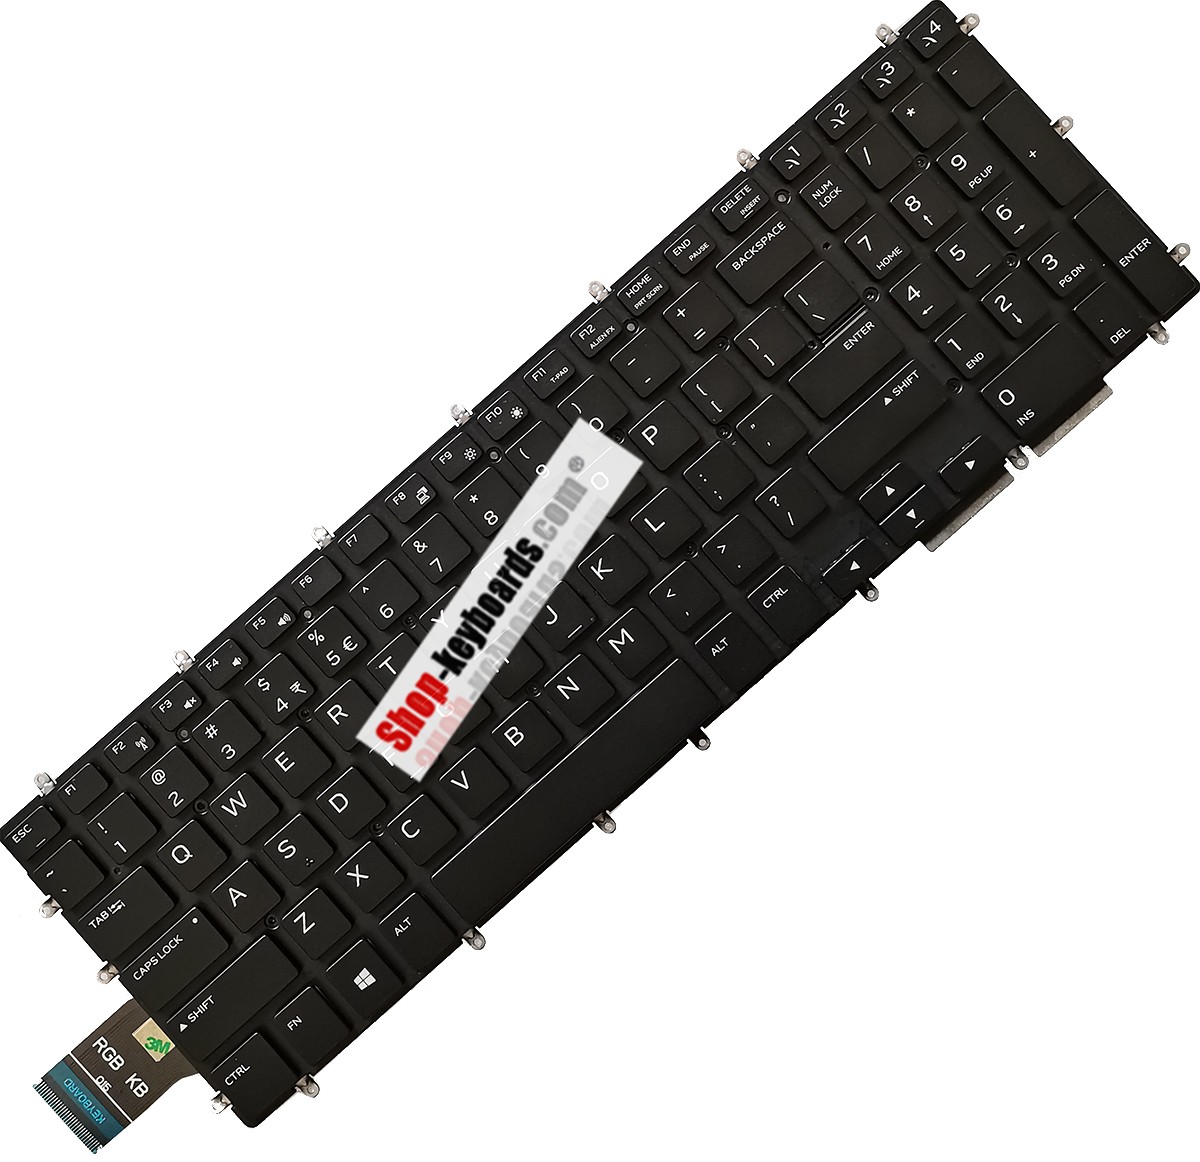 Dell 0KN4-0D1JP12 Keyboard replacement